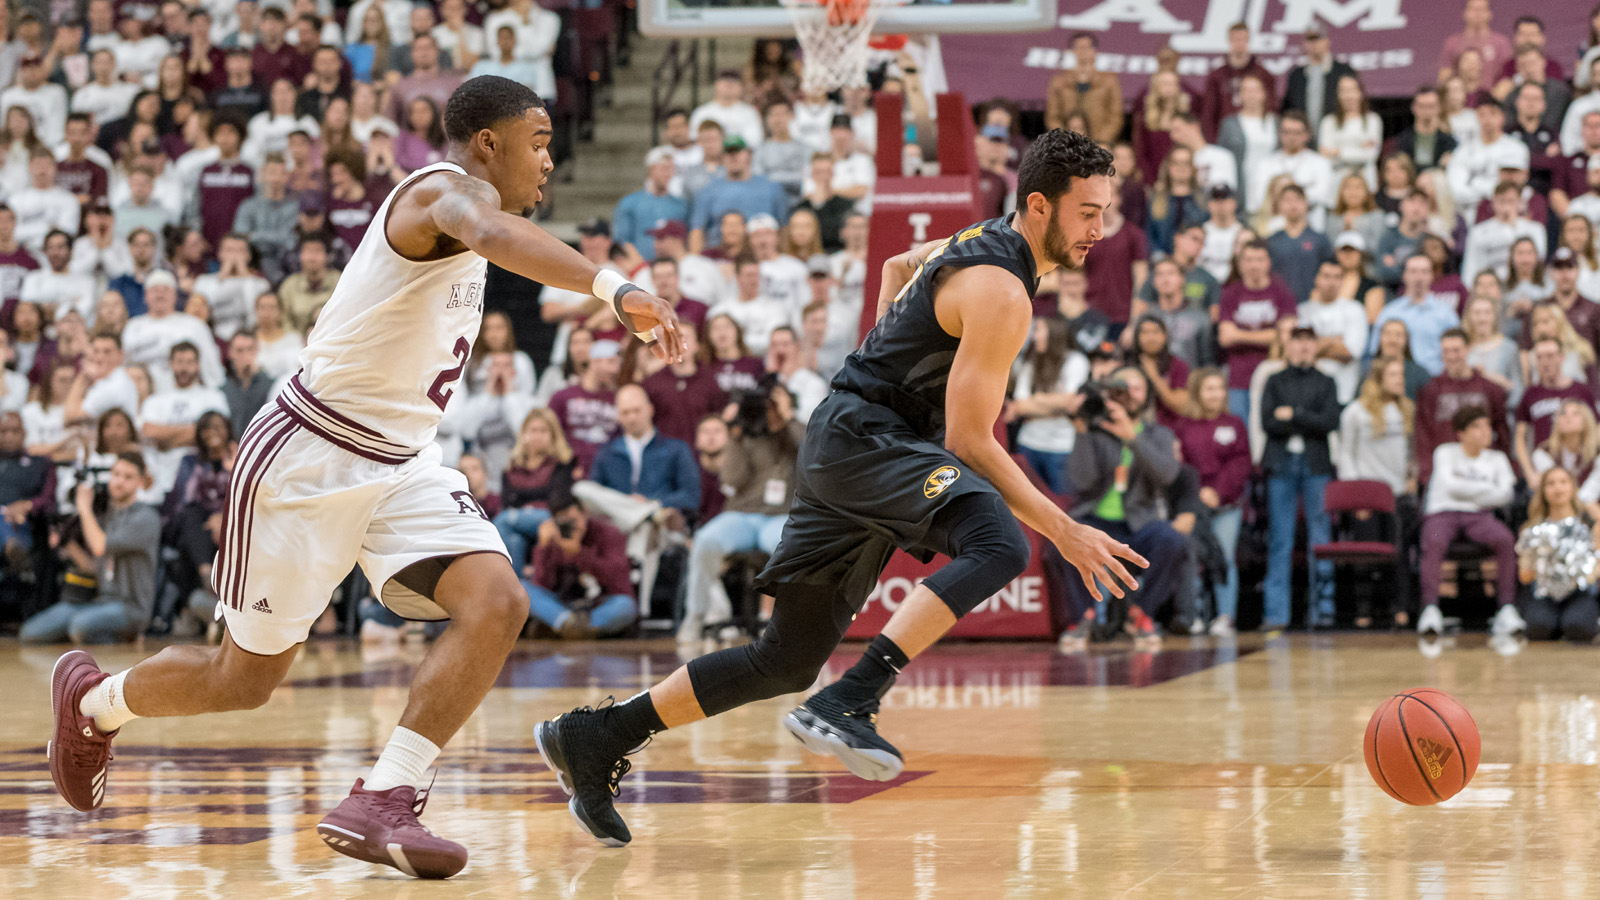 Offensive struggles plague Tigers in 60-49 loss to Texas A&M